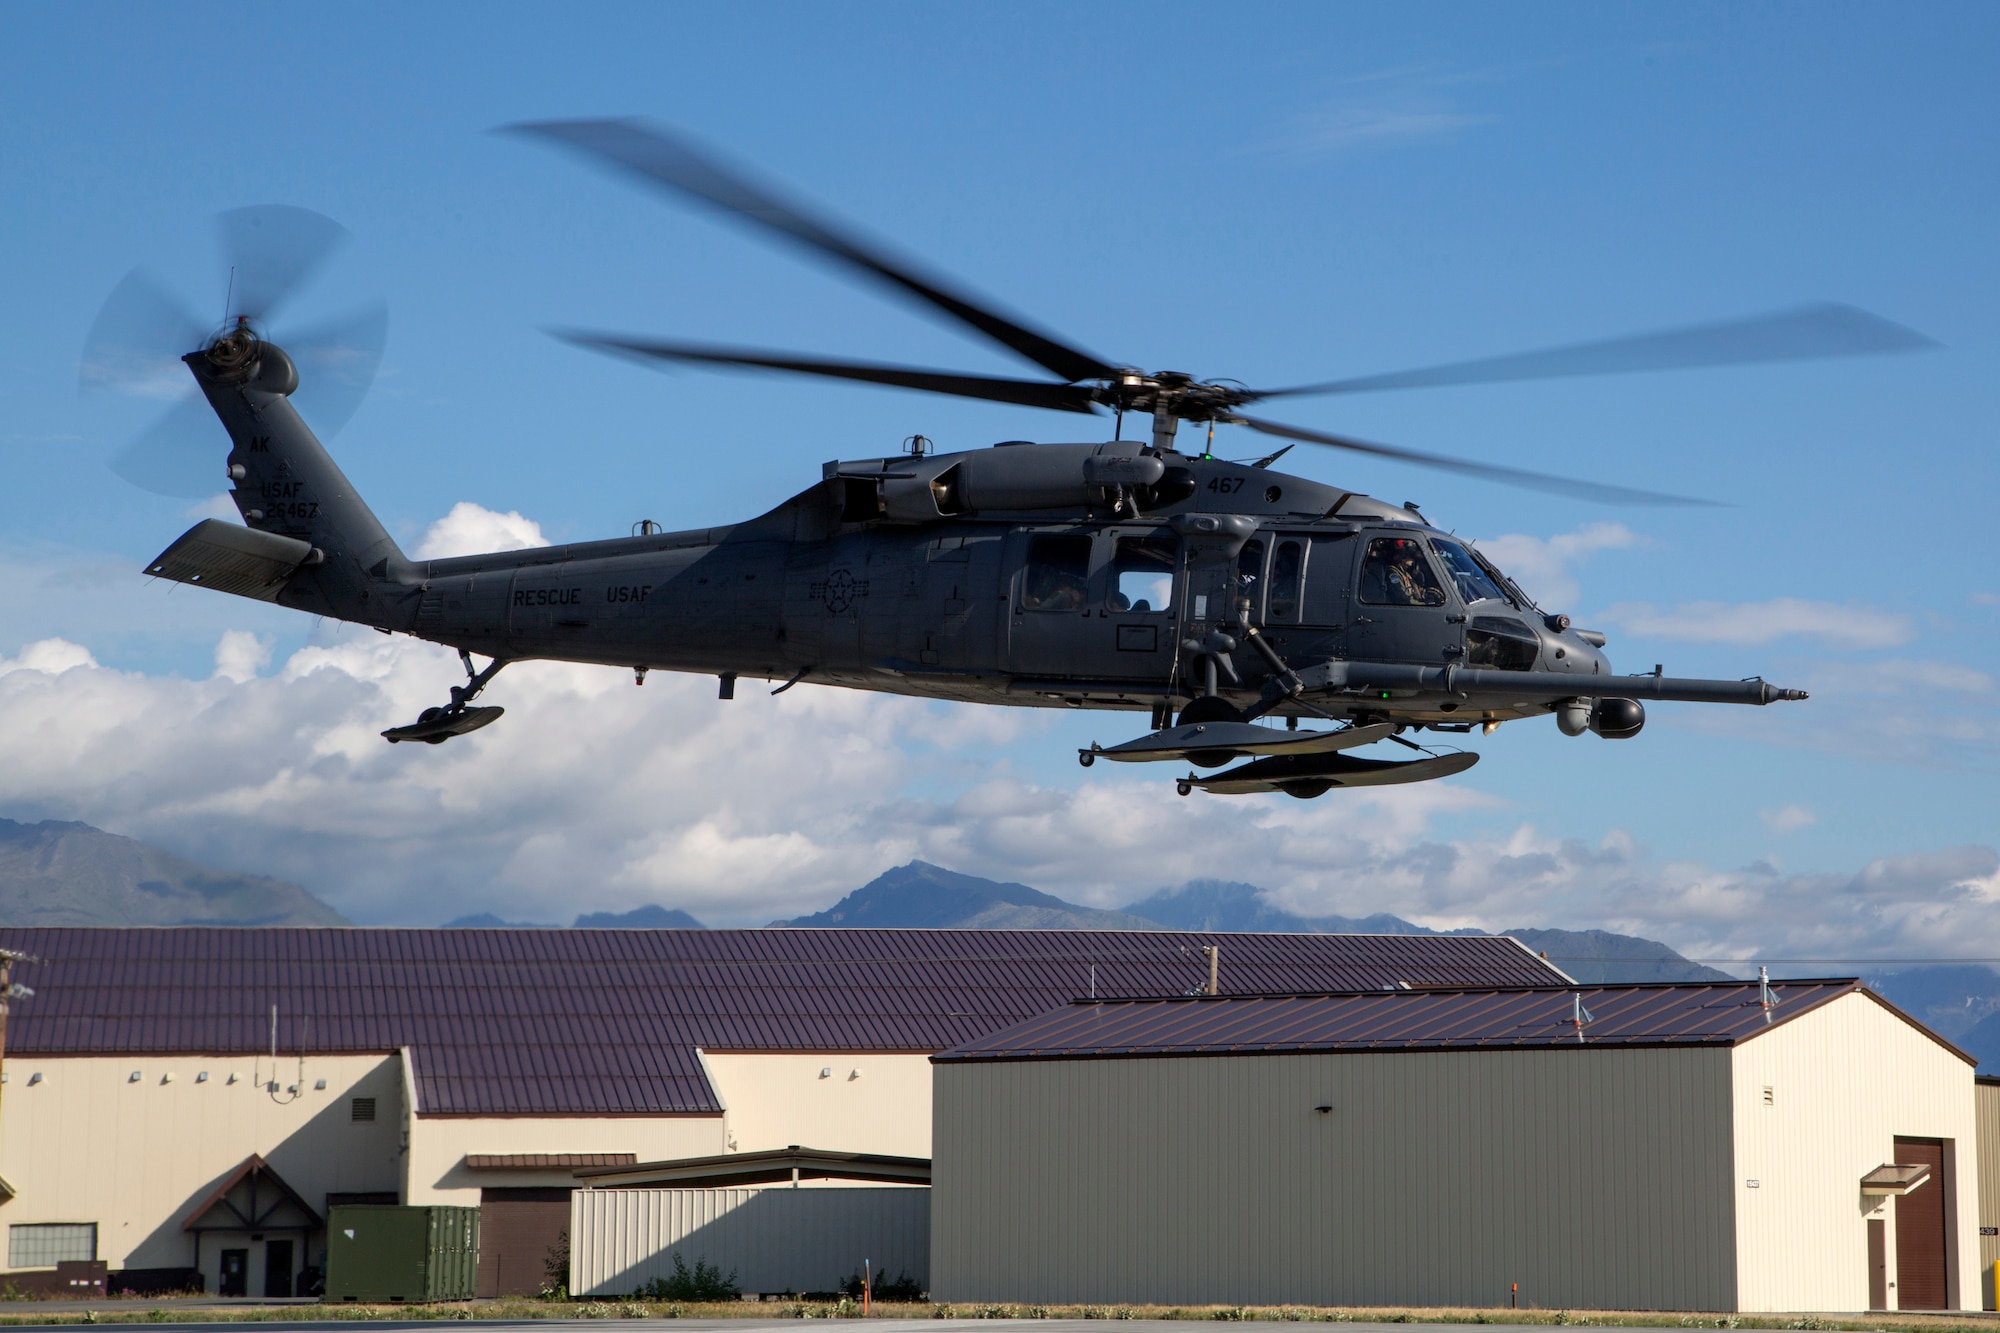 An Alaska Air National Guard HH-60G Pave Hawk helicopter, assigned to the 210th Rescue Squadron, takes off from Joint Base Elmendorf-Richardson, Alaska, July 23, 2015. The 210th Rescue Squadron provides emergency rescue services for the citizens of Alaska in addition to training for wartime combat search-and-rescue missions.